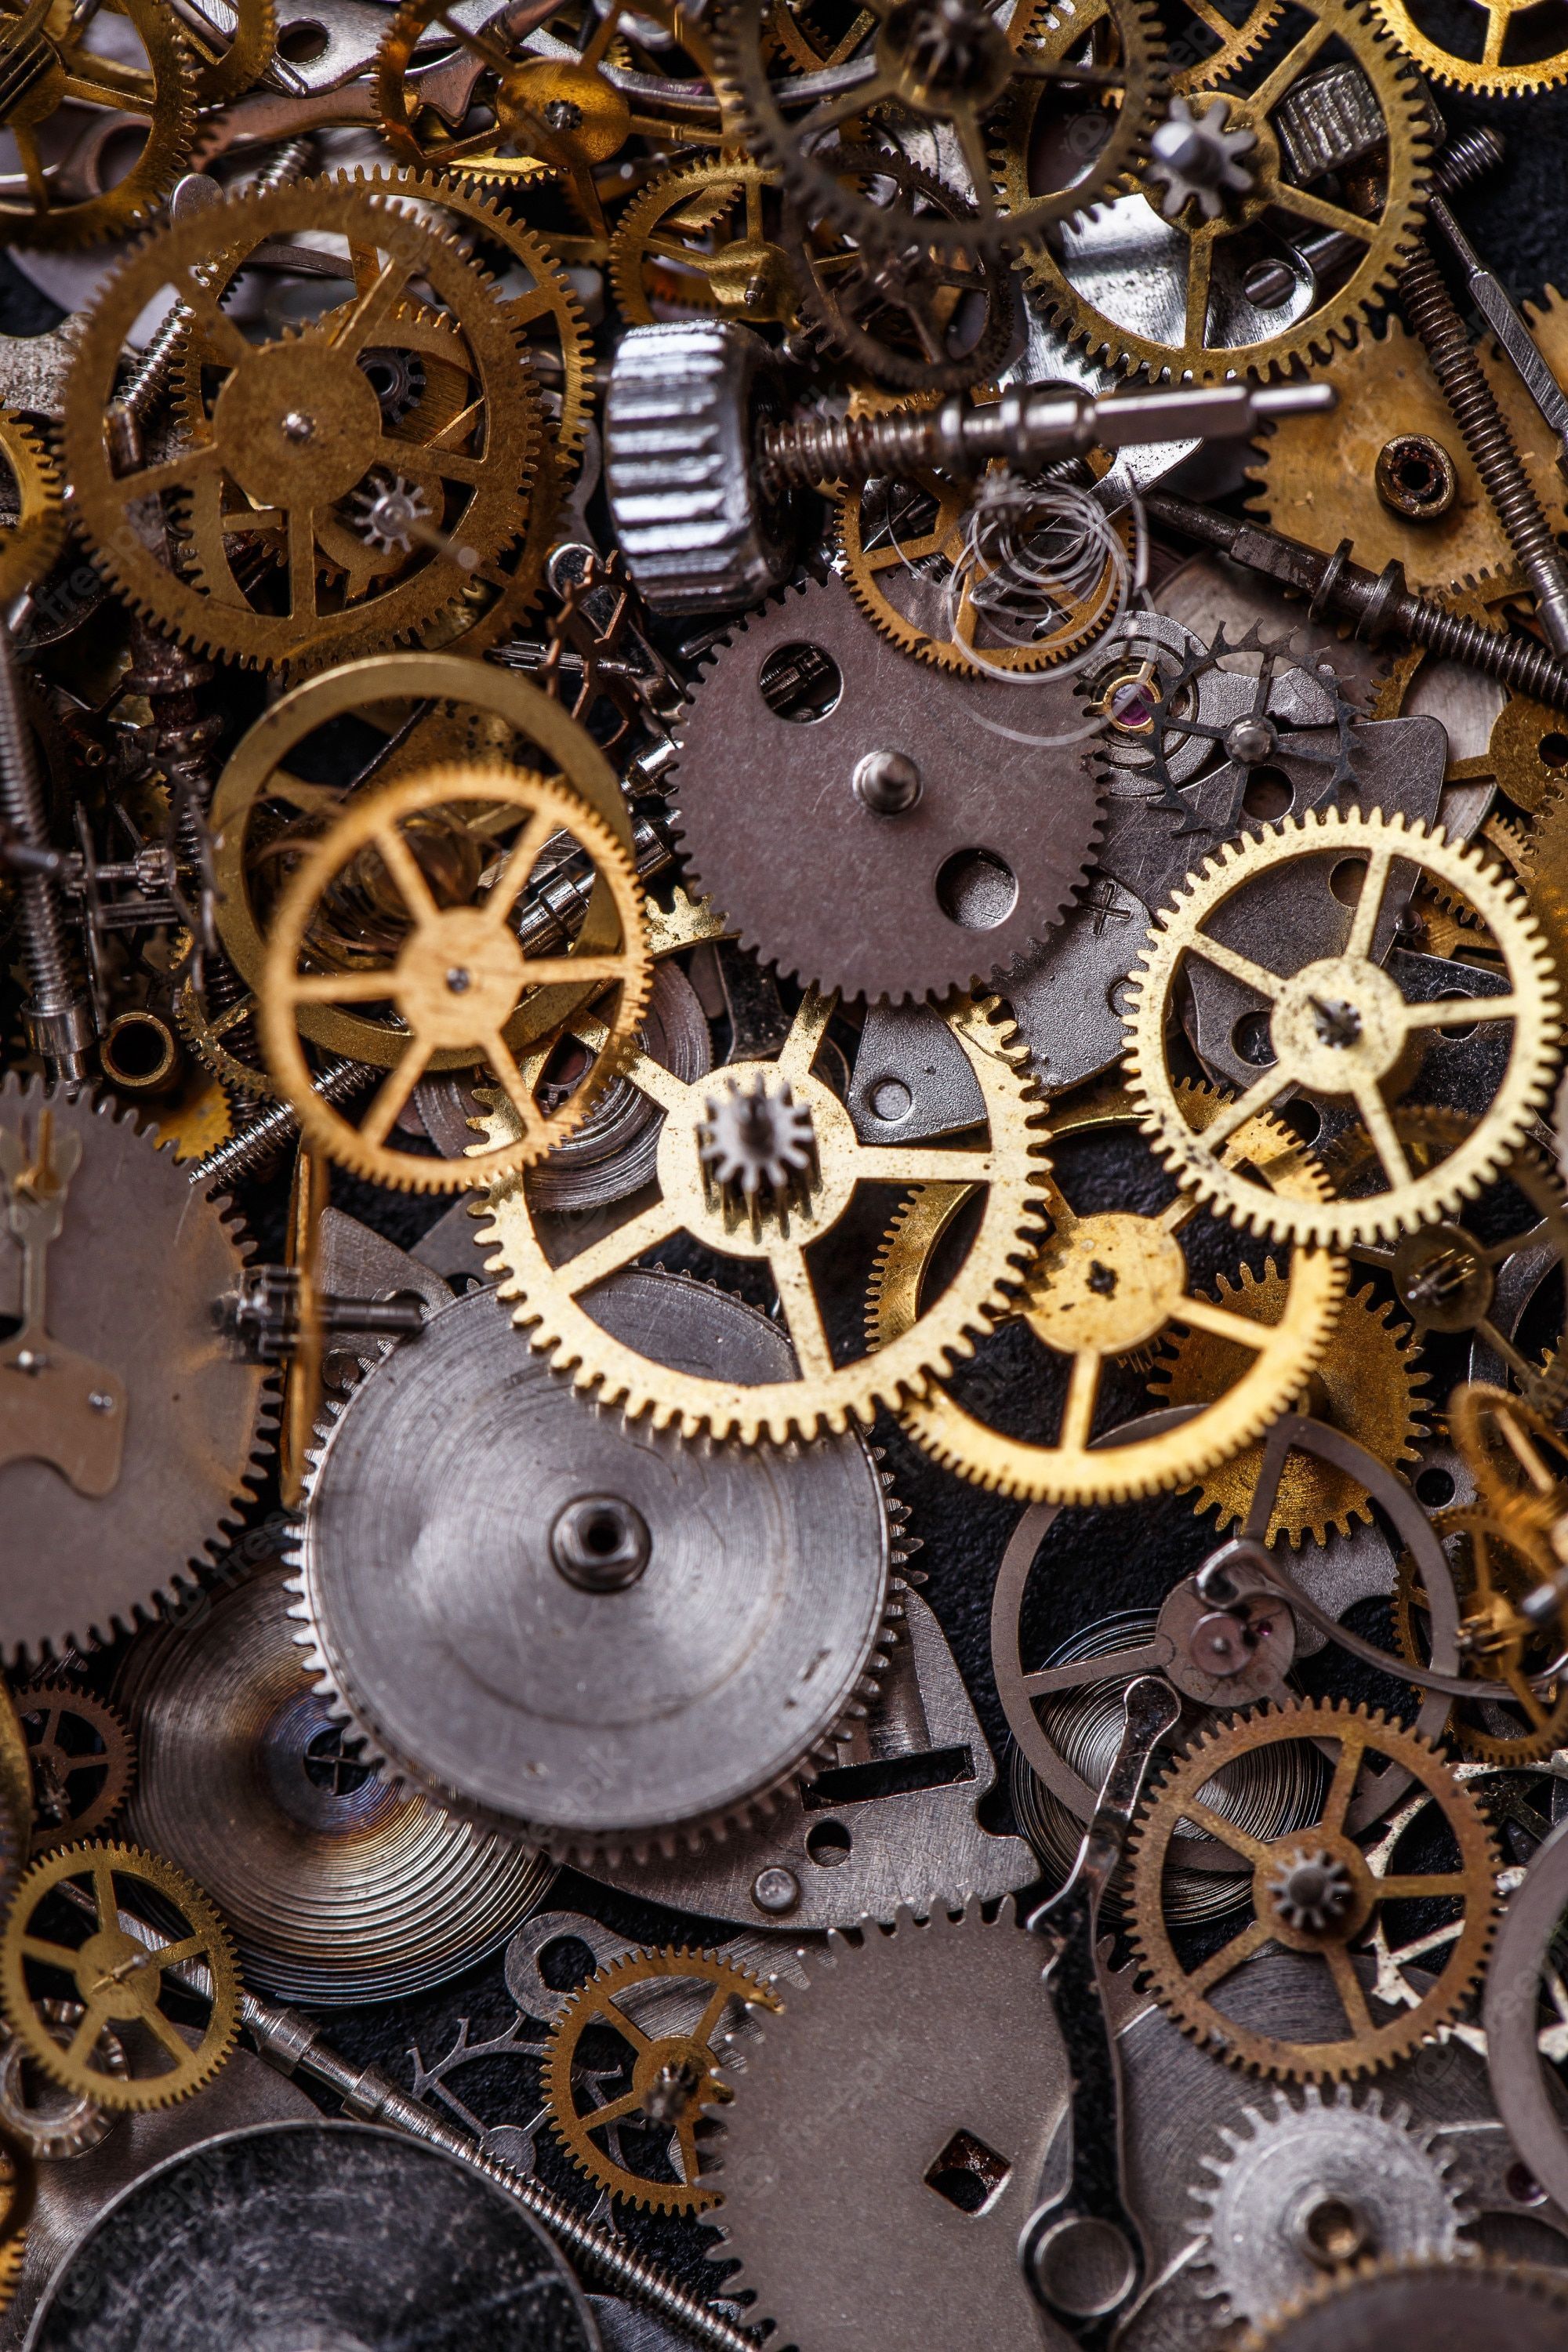 A close up of a pile of watch parts, including gold and silver gears. - Steampunk